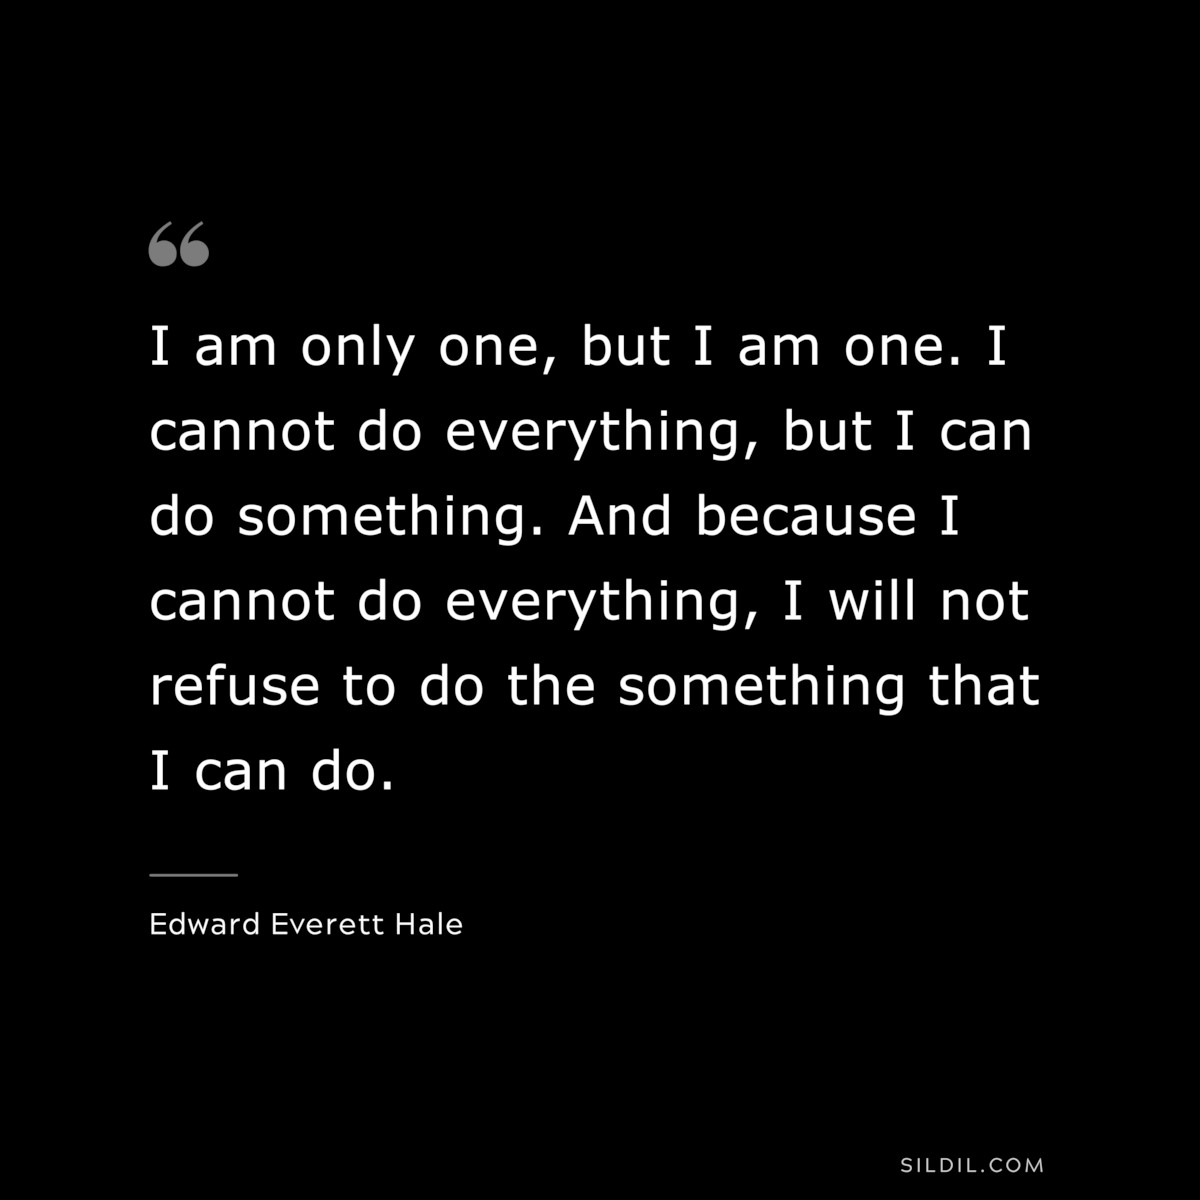 I am only one, but I am one. I cannot do everything, but I can do something. And because I cannot do everything, I will not refuse to do the something that I can do. ― Edward Everett Hale